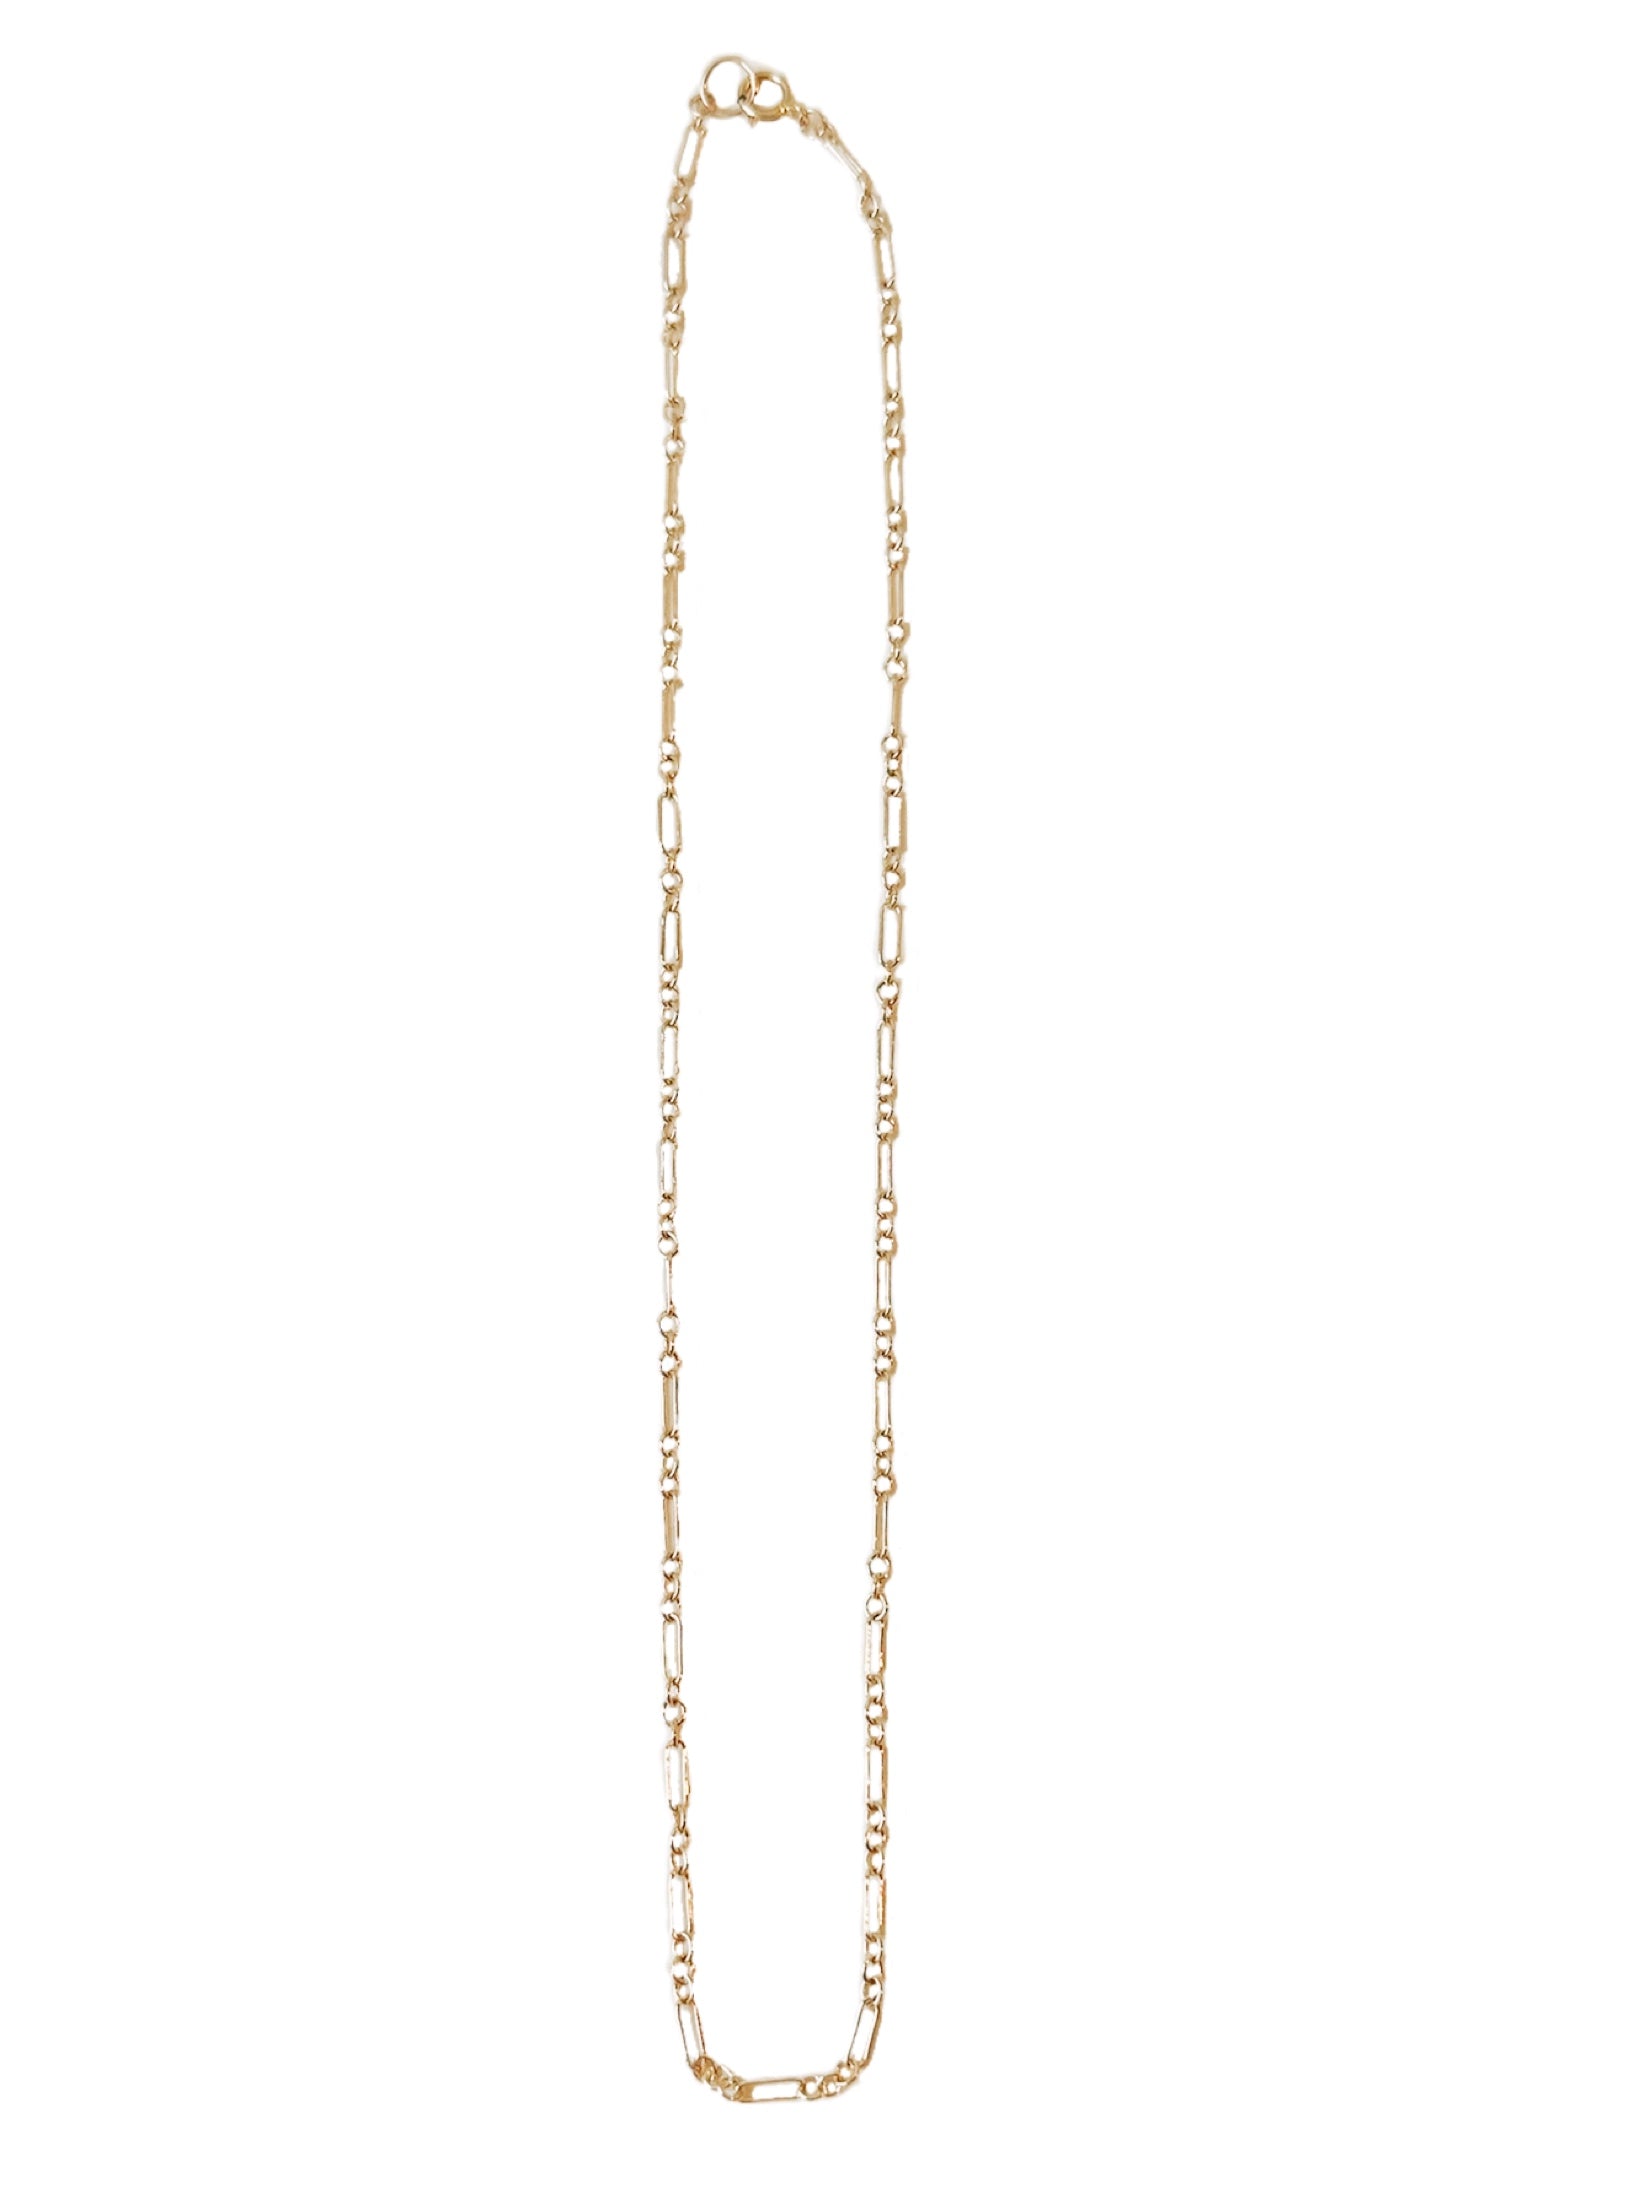 Naples - dainty gold-filled link necklace